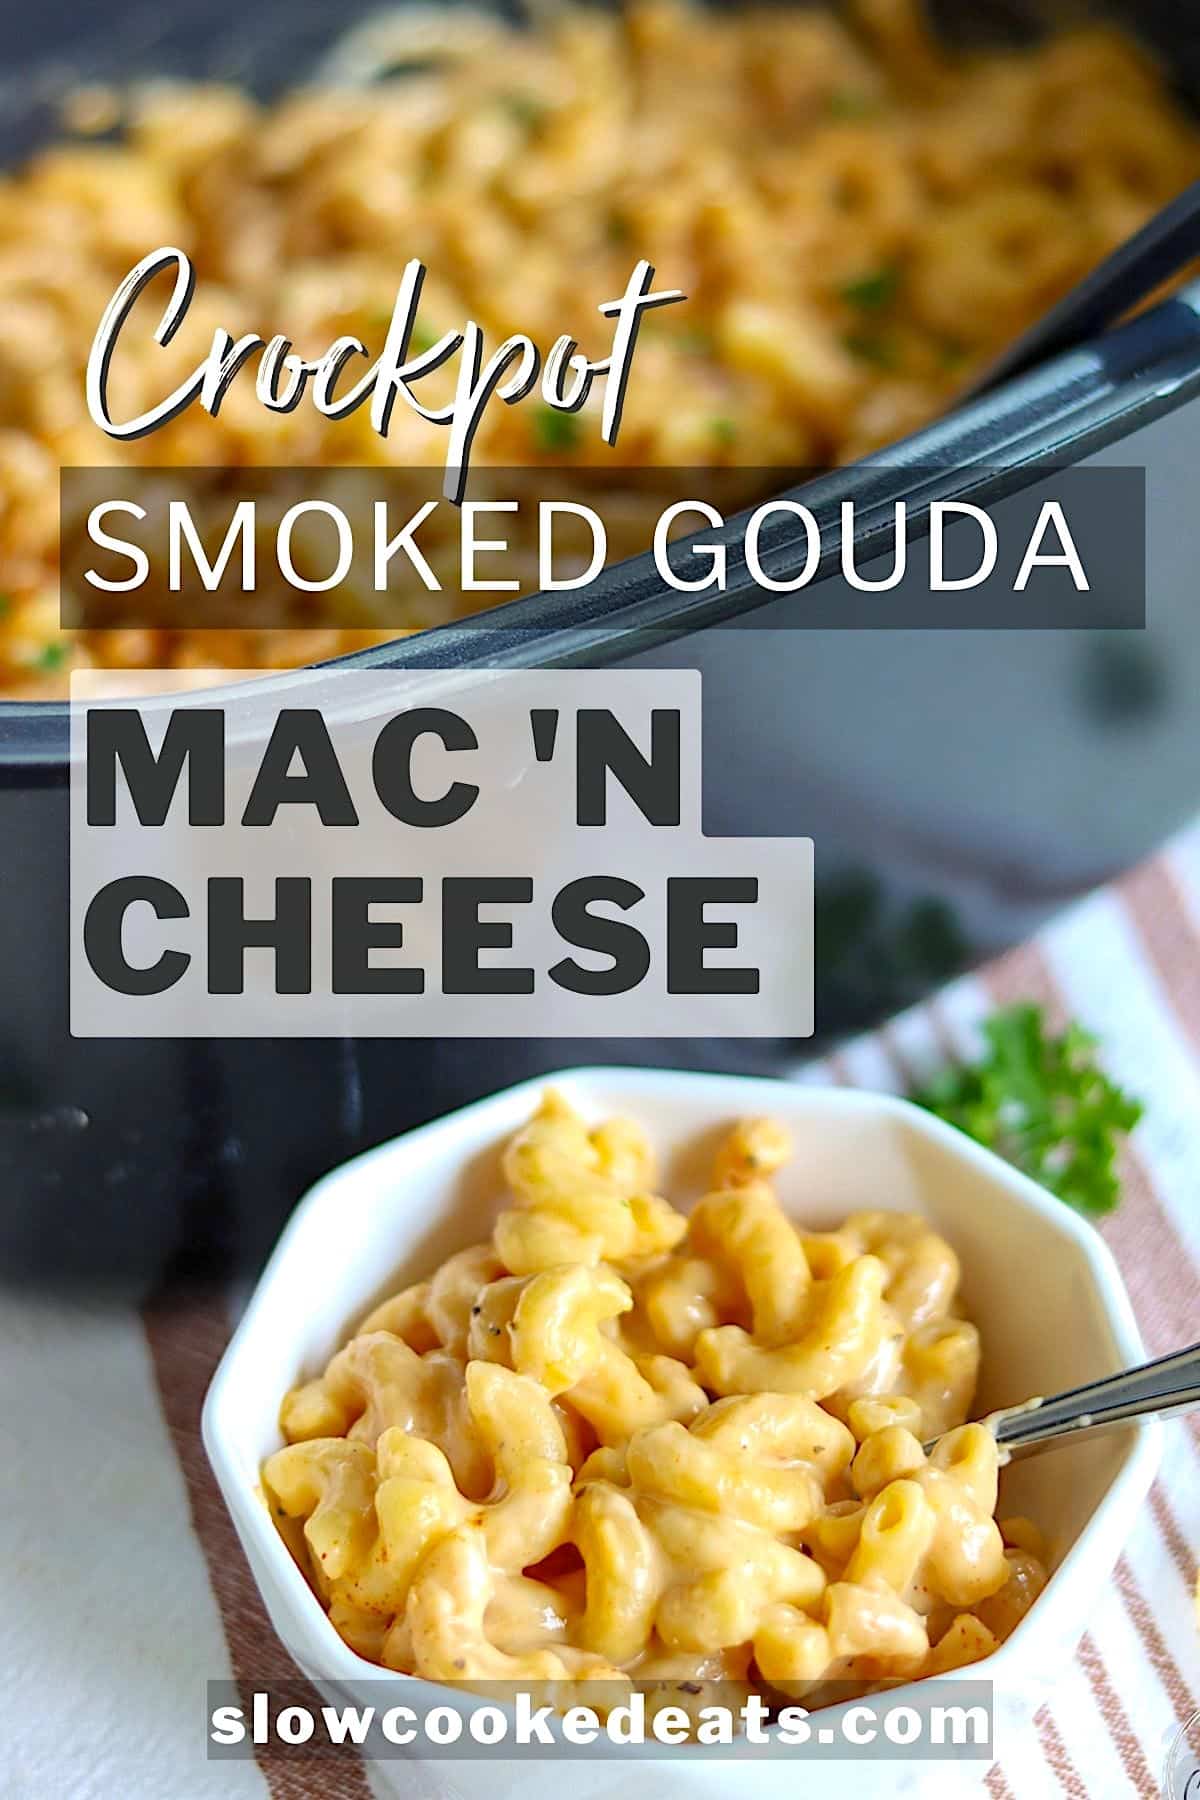 Pinterest pin with smoked gouda mac and cheese in a black crockpot.